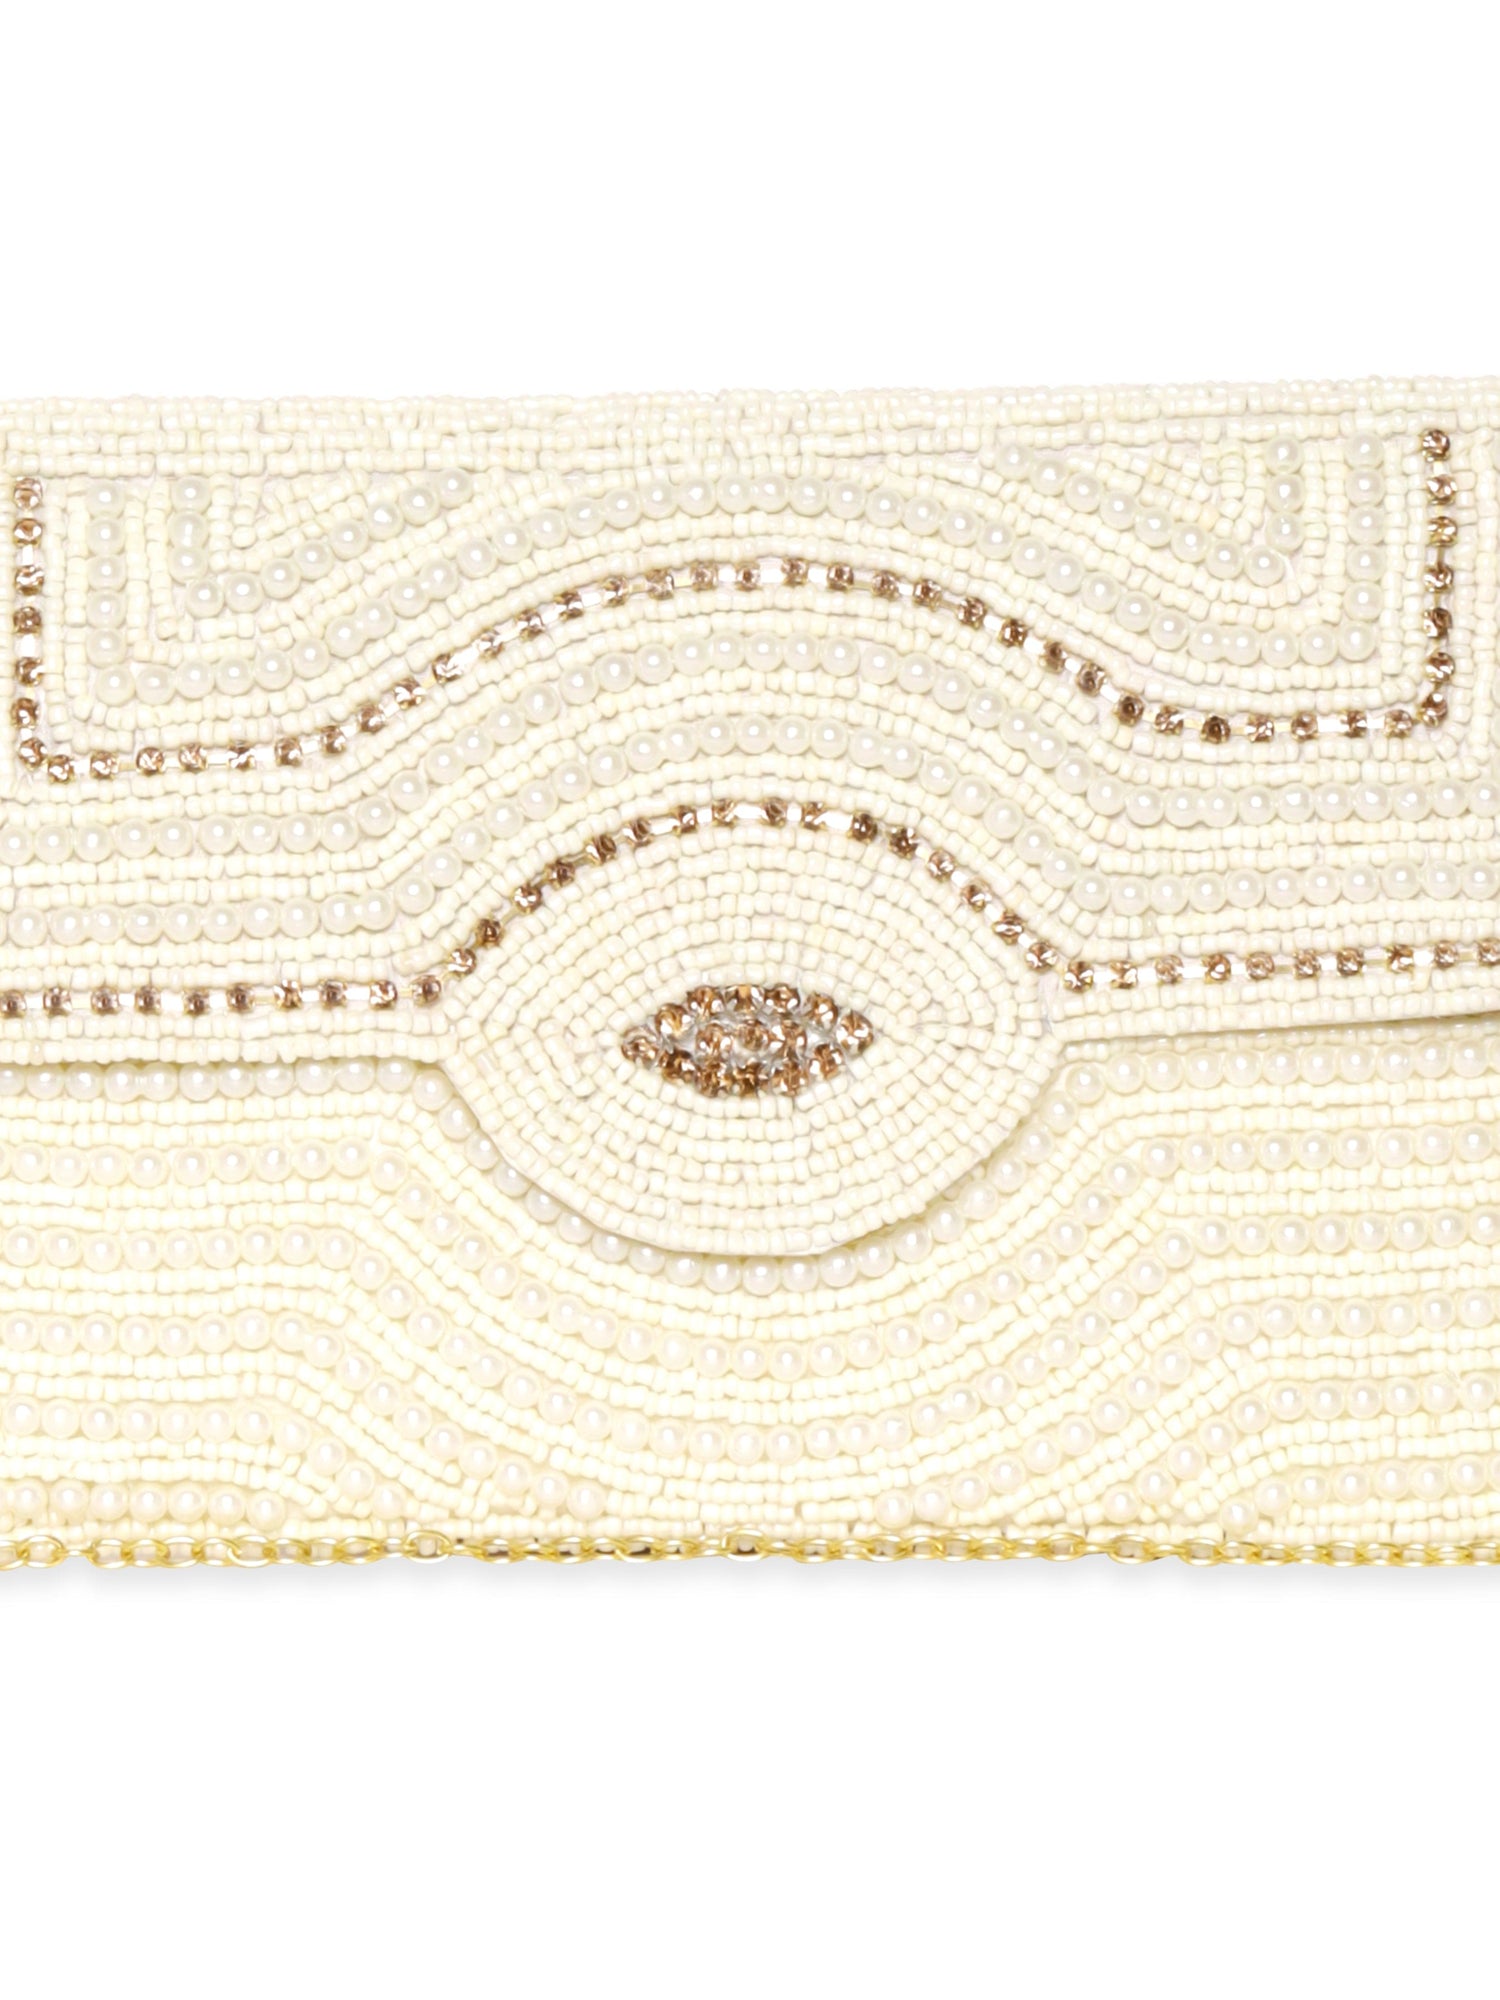 Rubans White Clutch Bags with Pearl and Stone Embellishment Handbag, Wallet Accessories &amp; Clutches